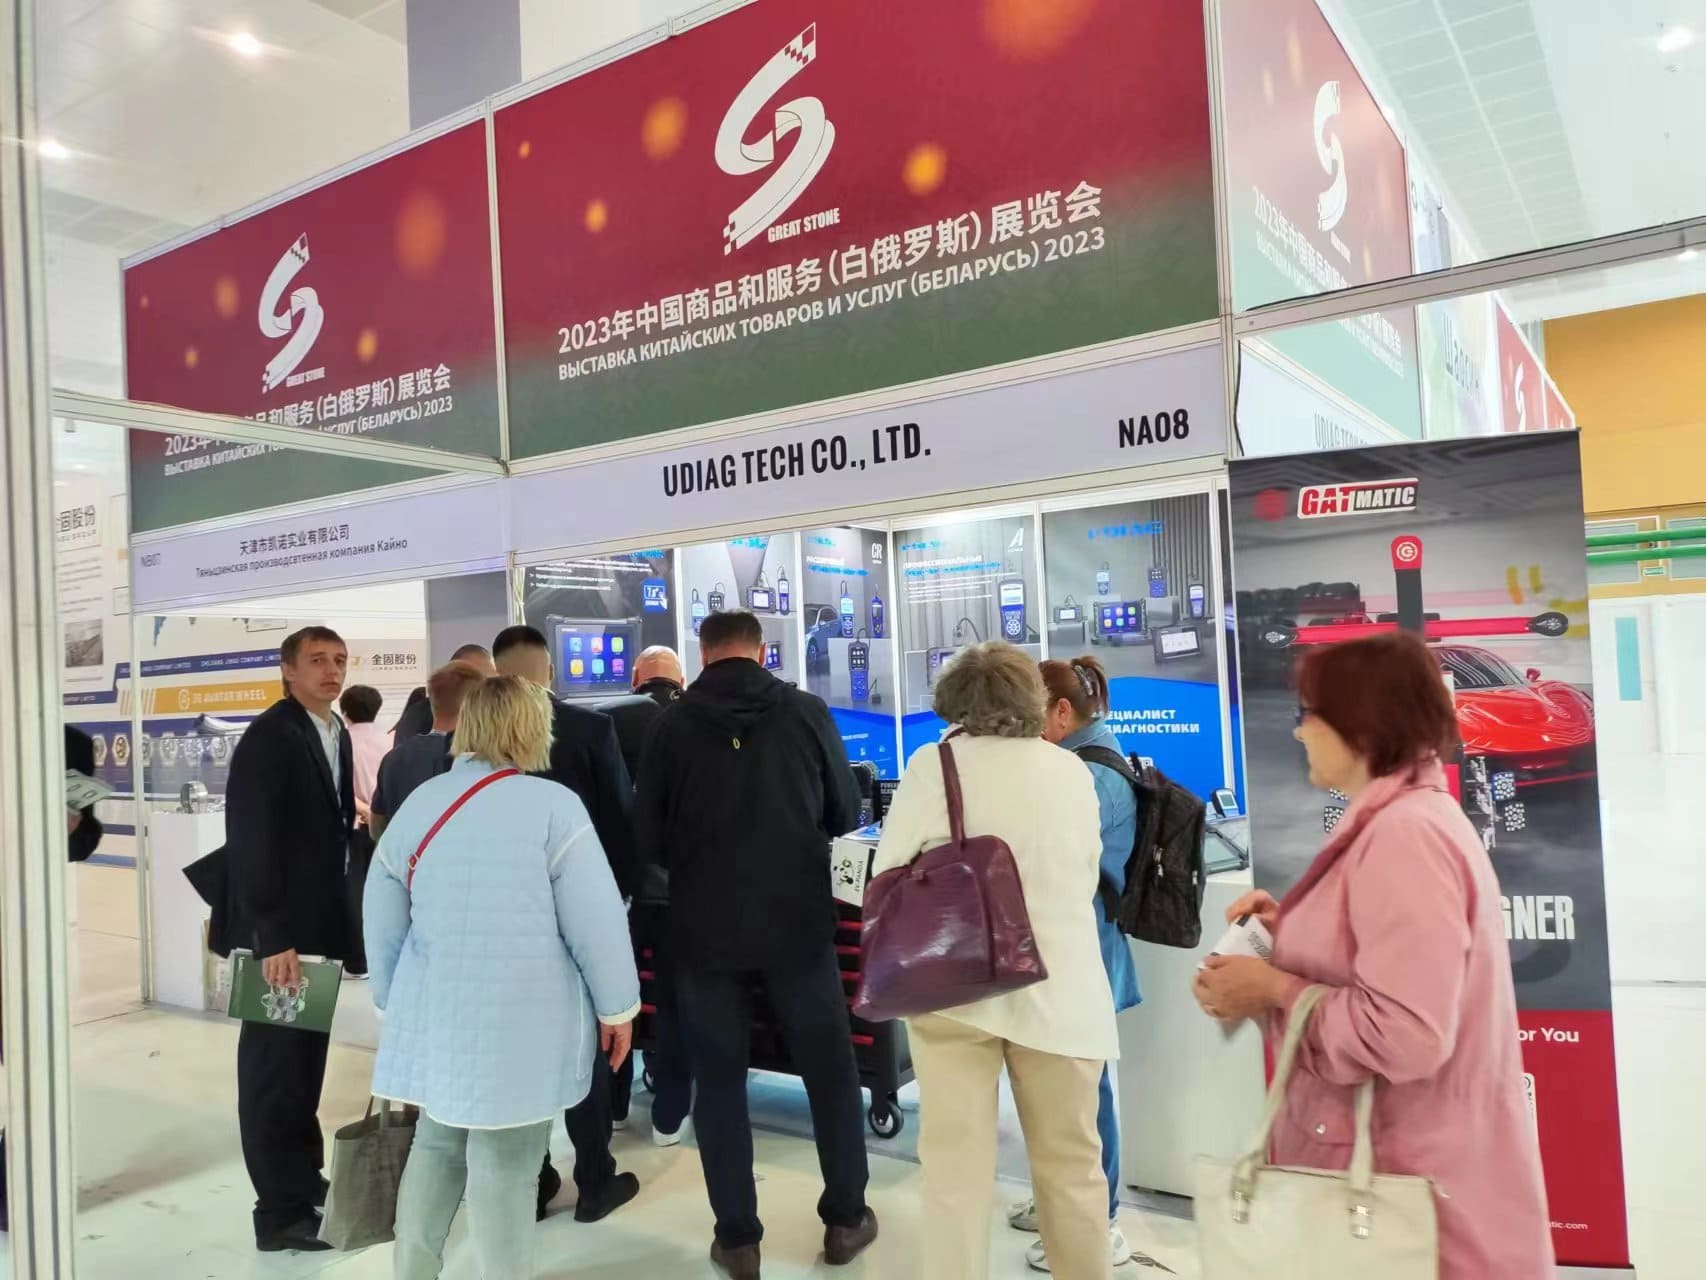 Chinese Commodities and Services BELARUS ONLINE SHOW Kicks Off with Great Success